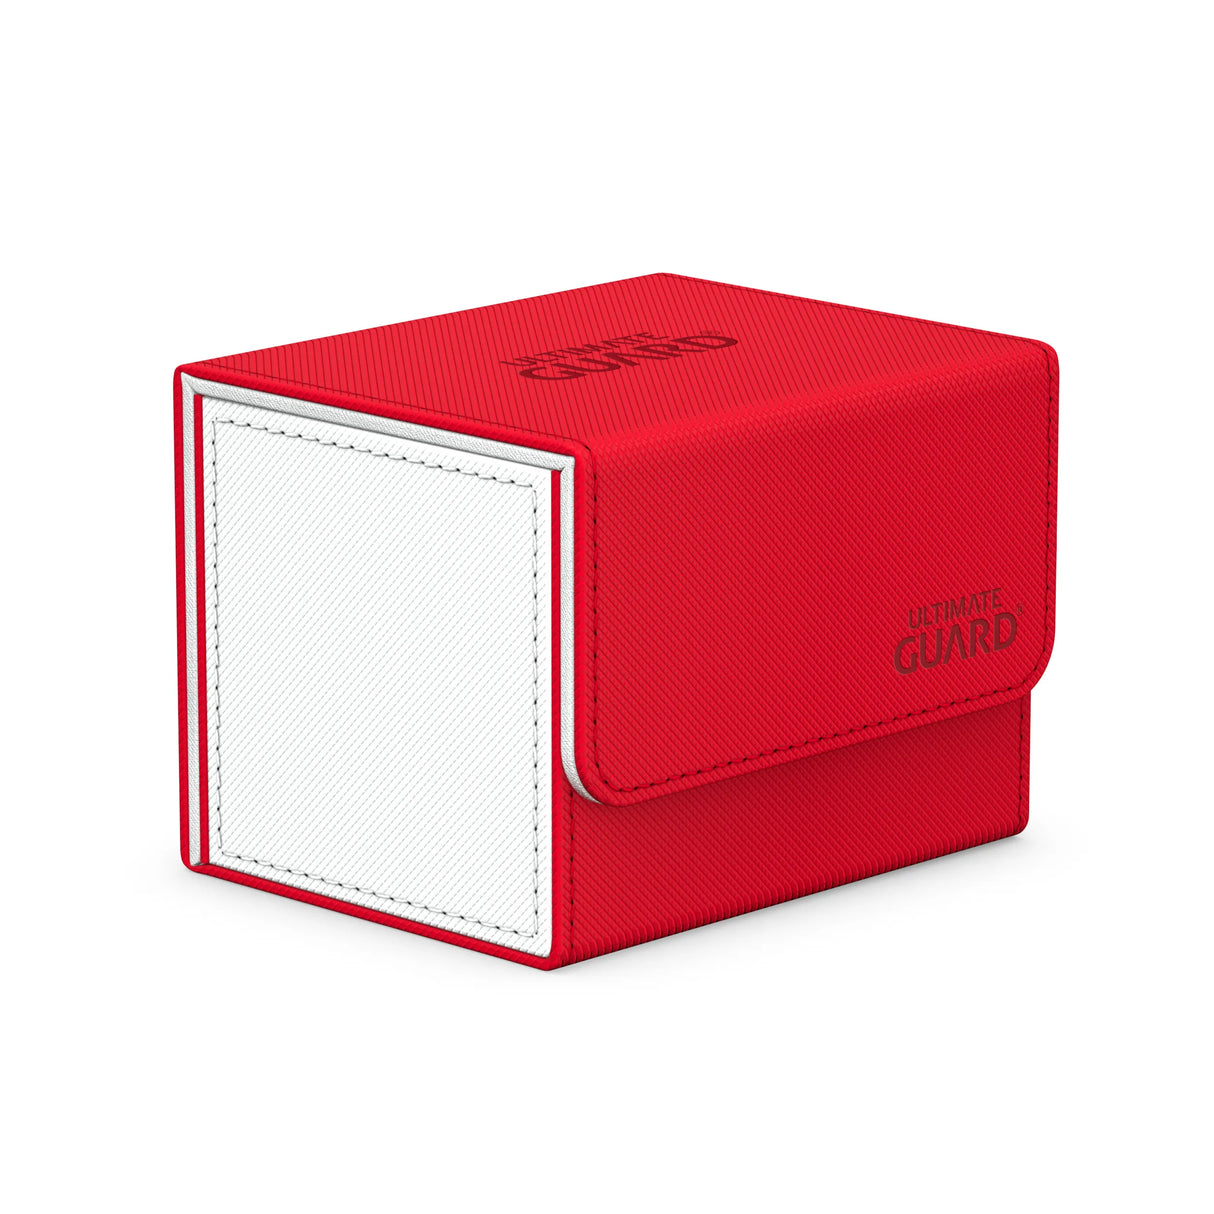 100+ Sidewinder Synergy Deck Box by Ultimate Guard - Red / White